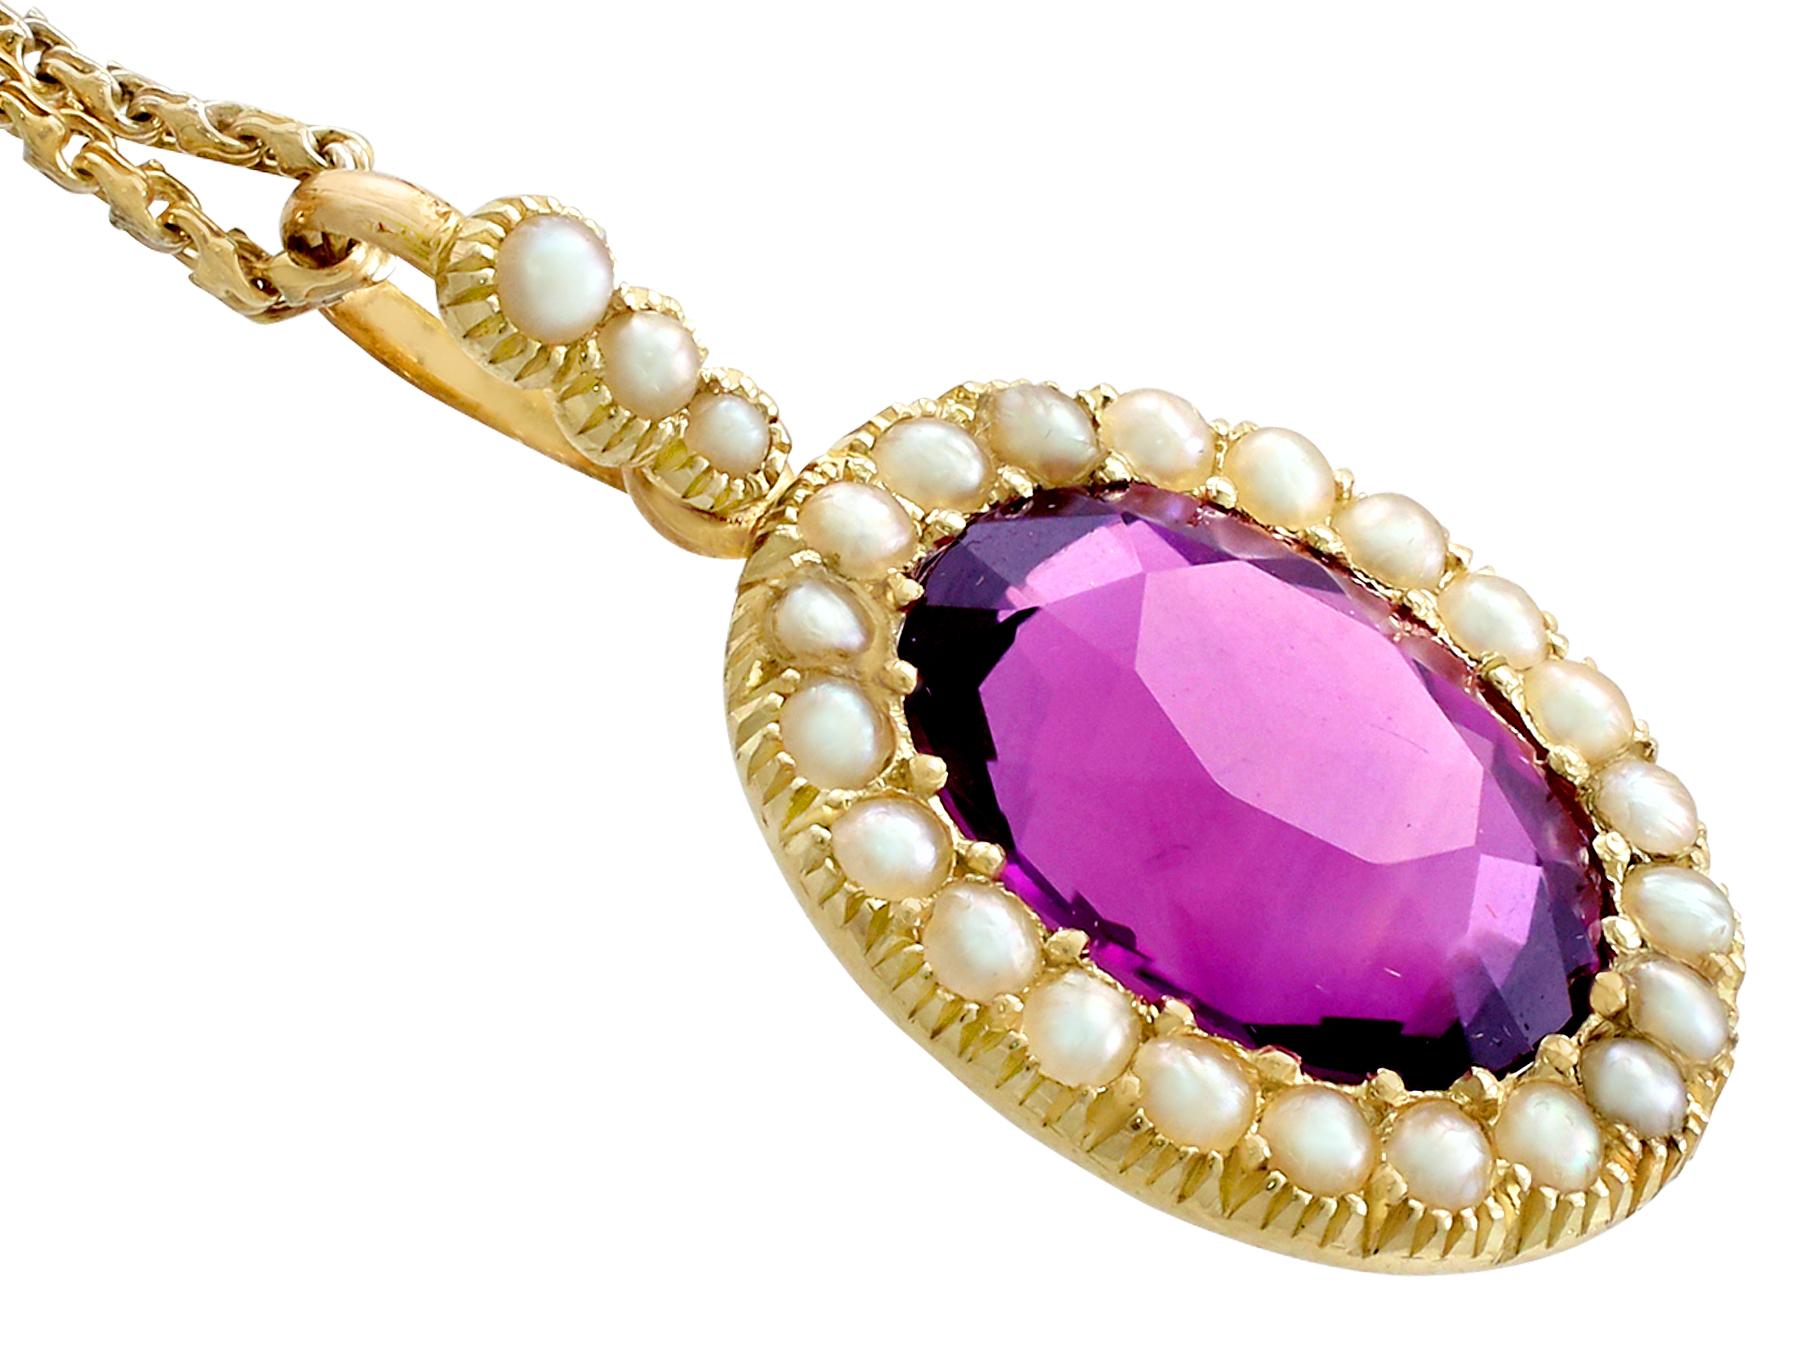 Antique 6.56 Carat Amethyst and Pearl Yellow Gold Pendant In Excellent Condition For Sale In Jesmond, Newcastle Upon Tyne